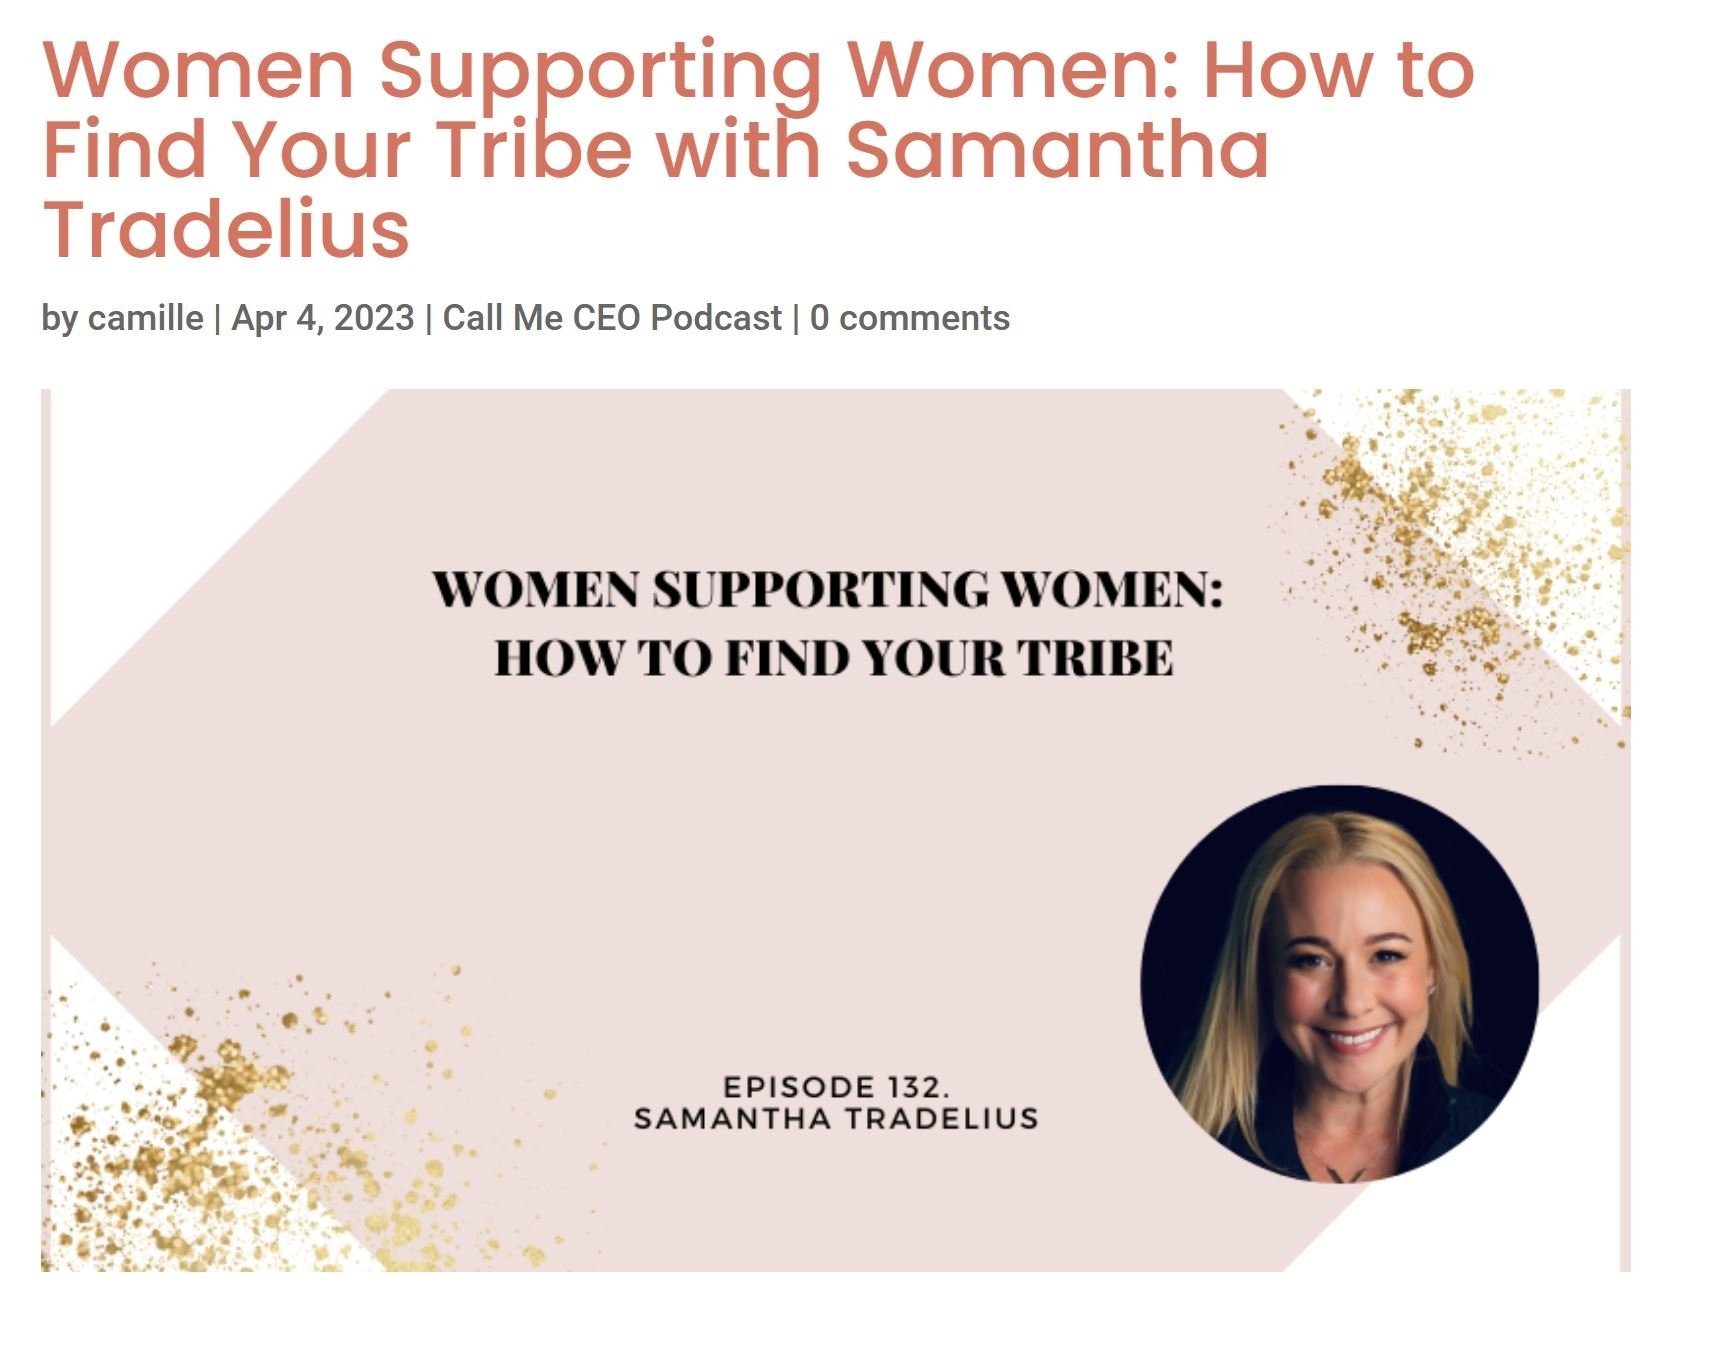 How to Find Your Tribe with Samantha Tradelius